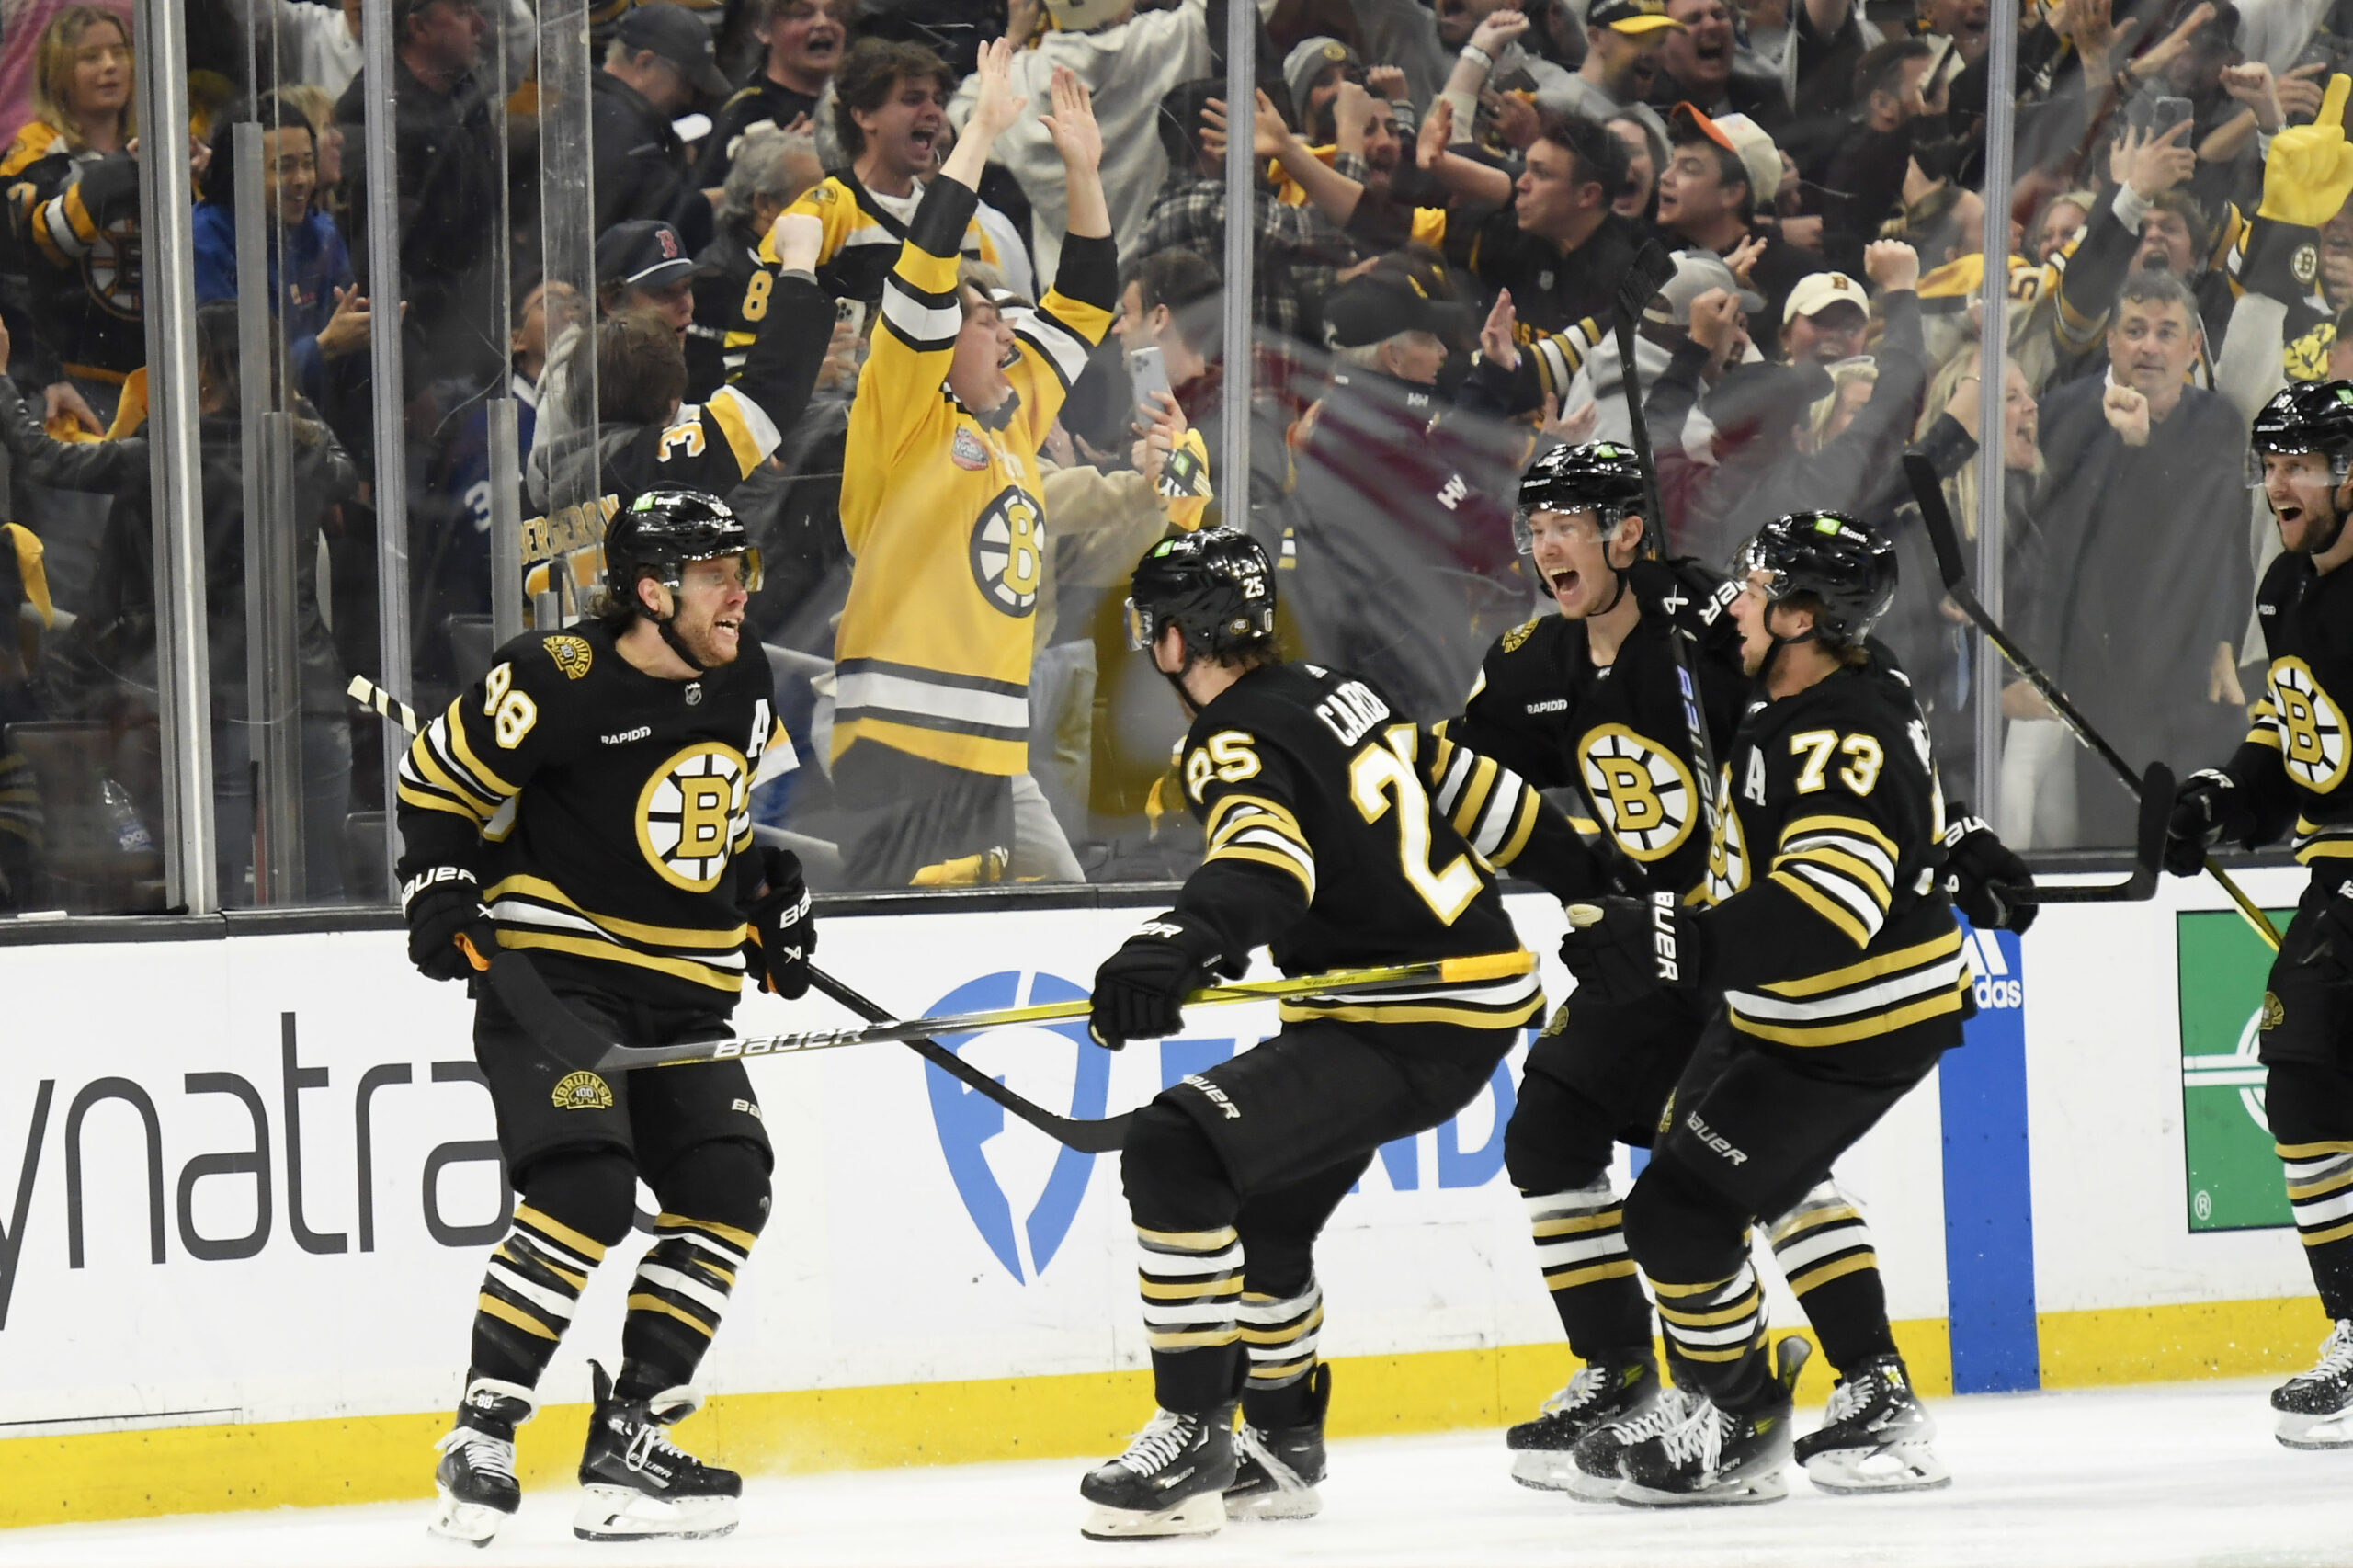 Boston Bruins in a Thrilling Playoff Rematch Against the Formidable Florida Panthers Win Game 1